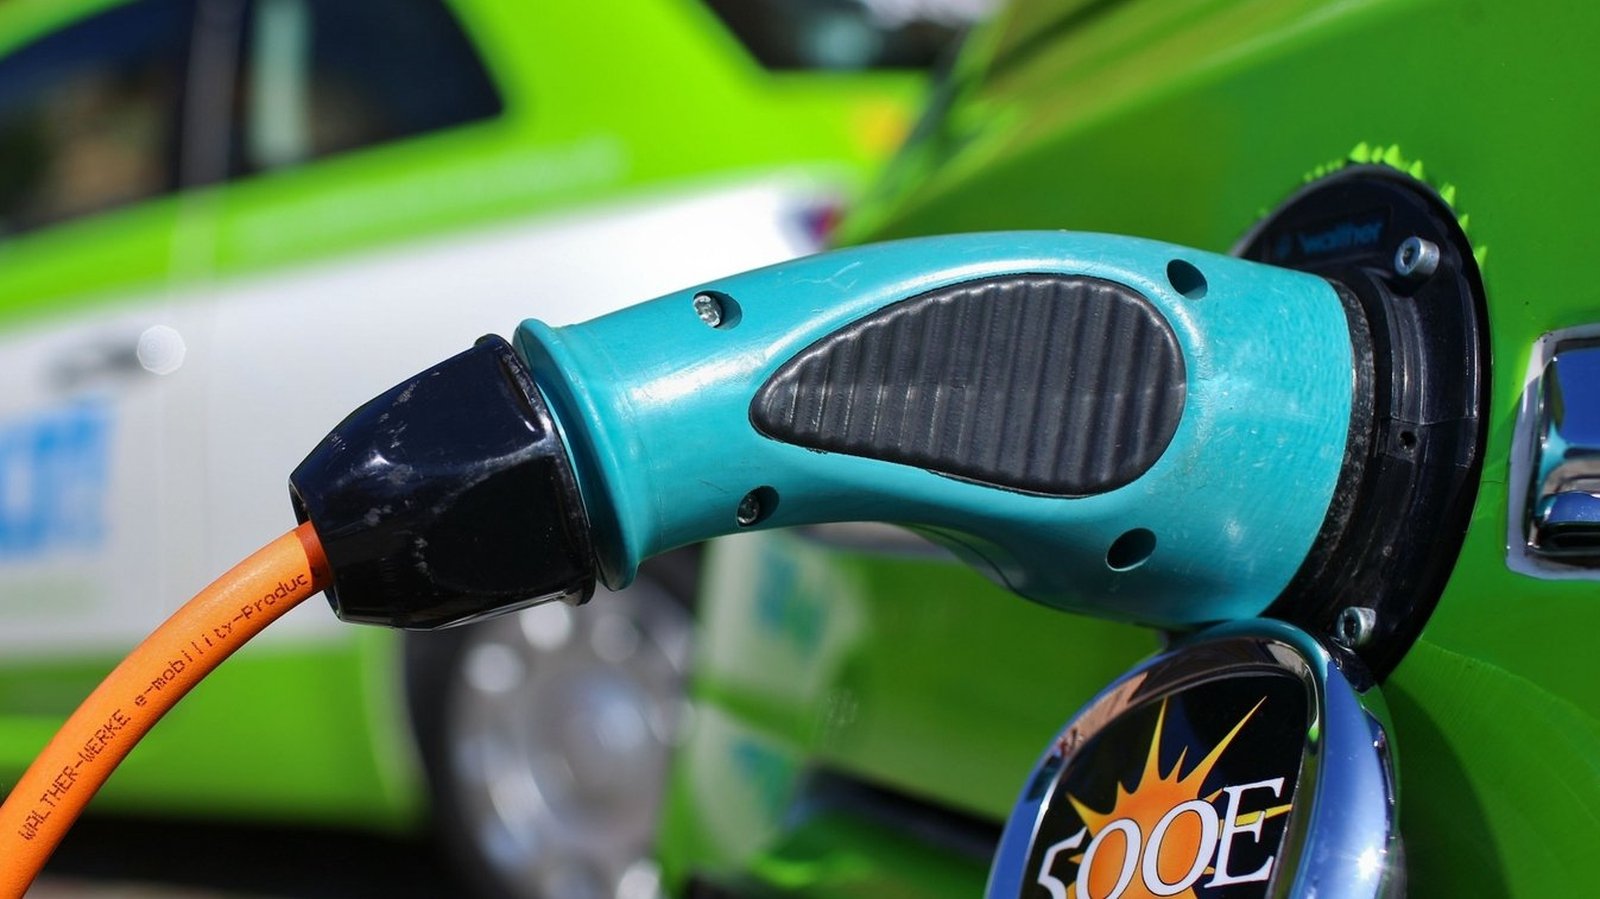 Are electric vehicles the answer to issues around air pollution?